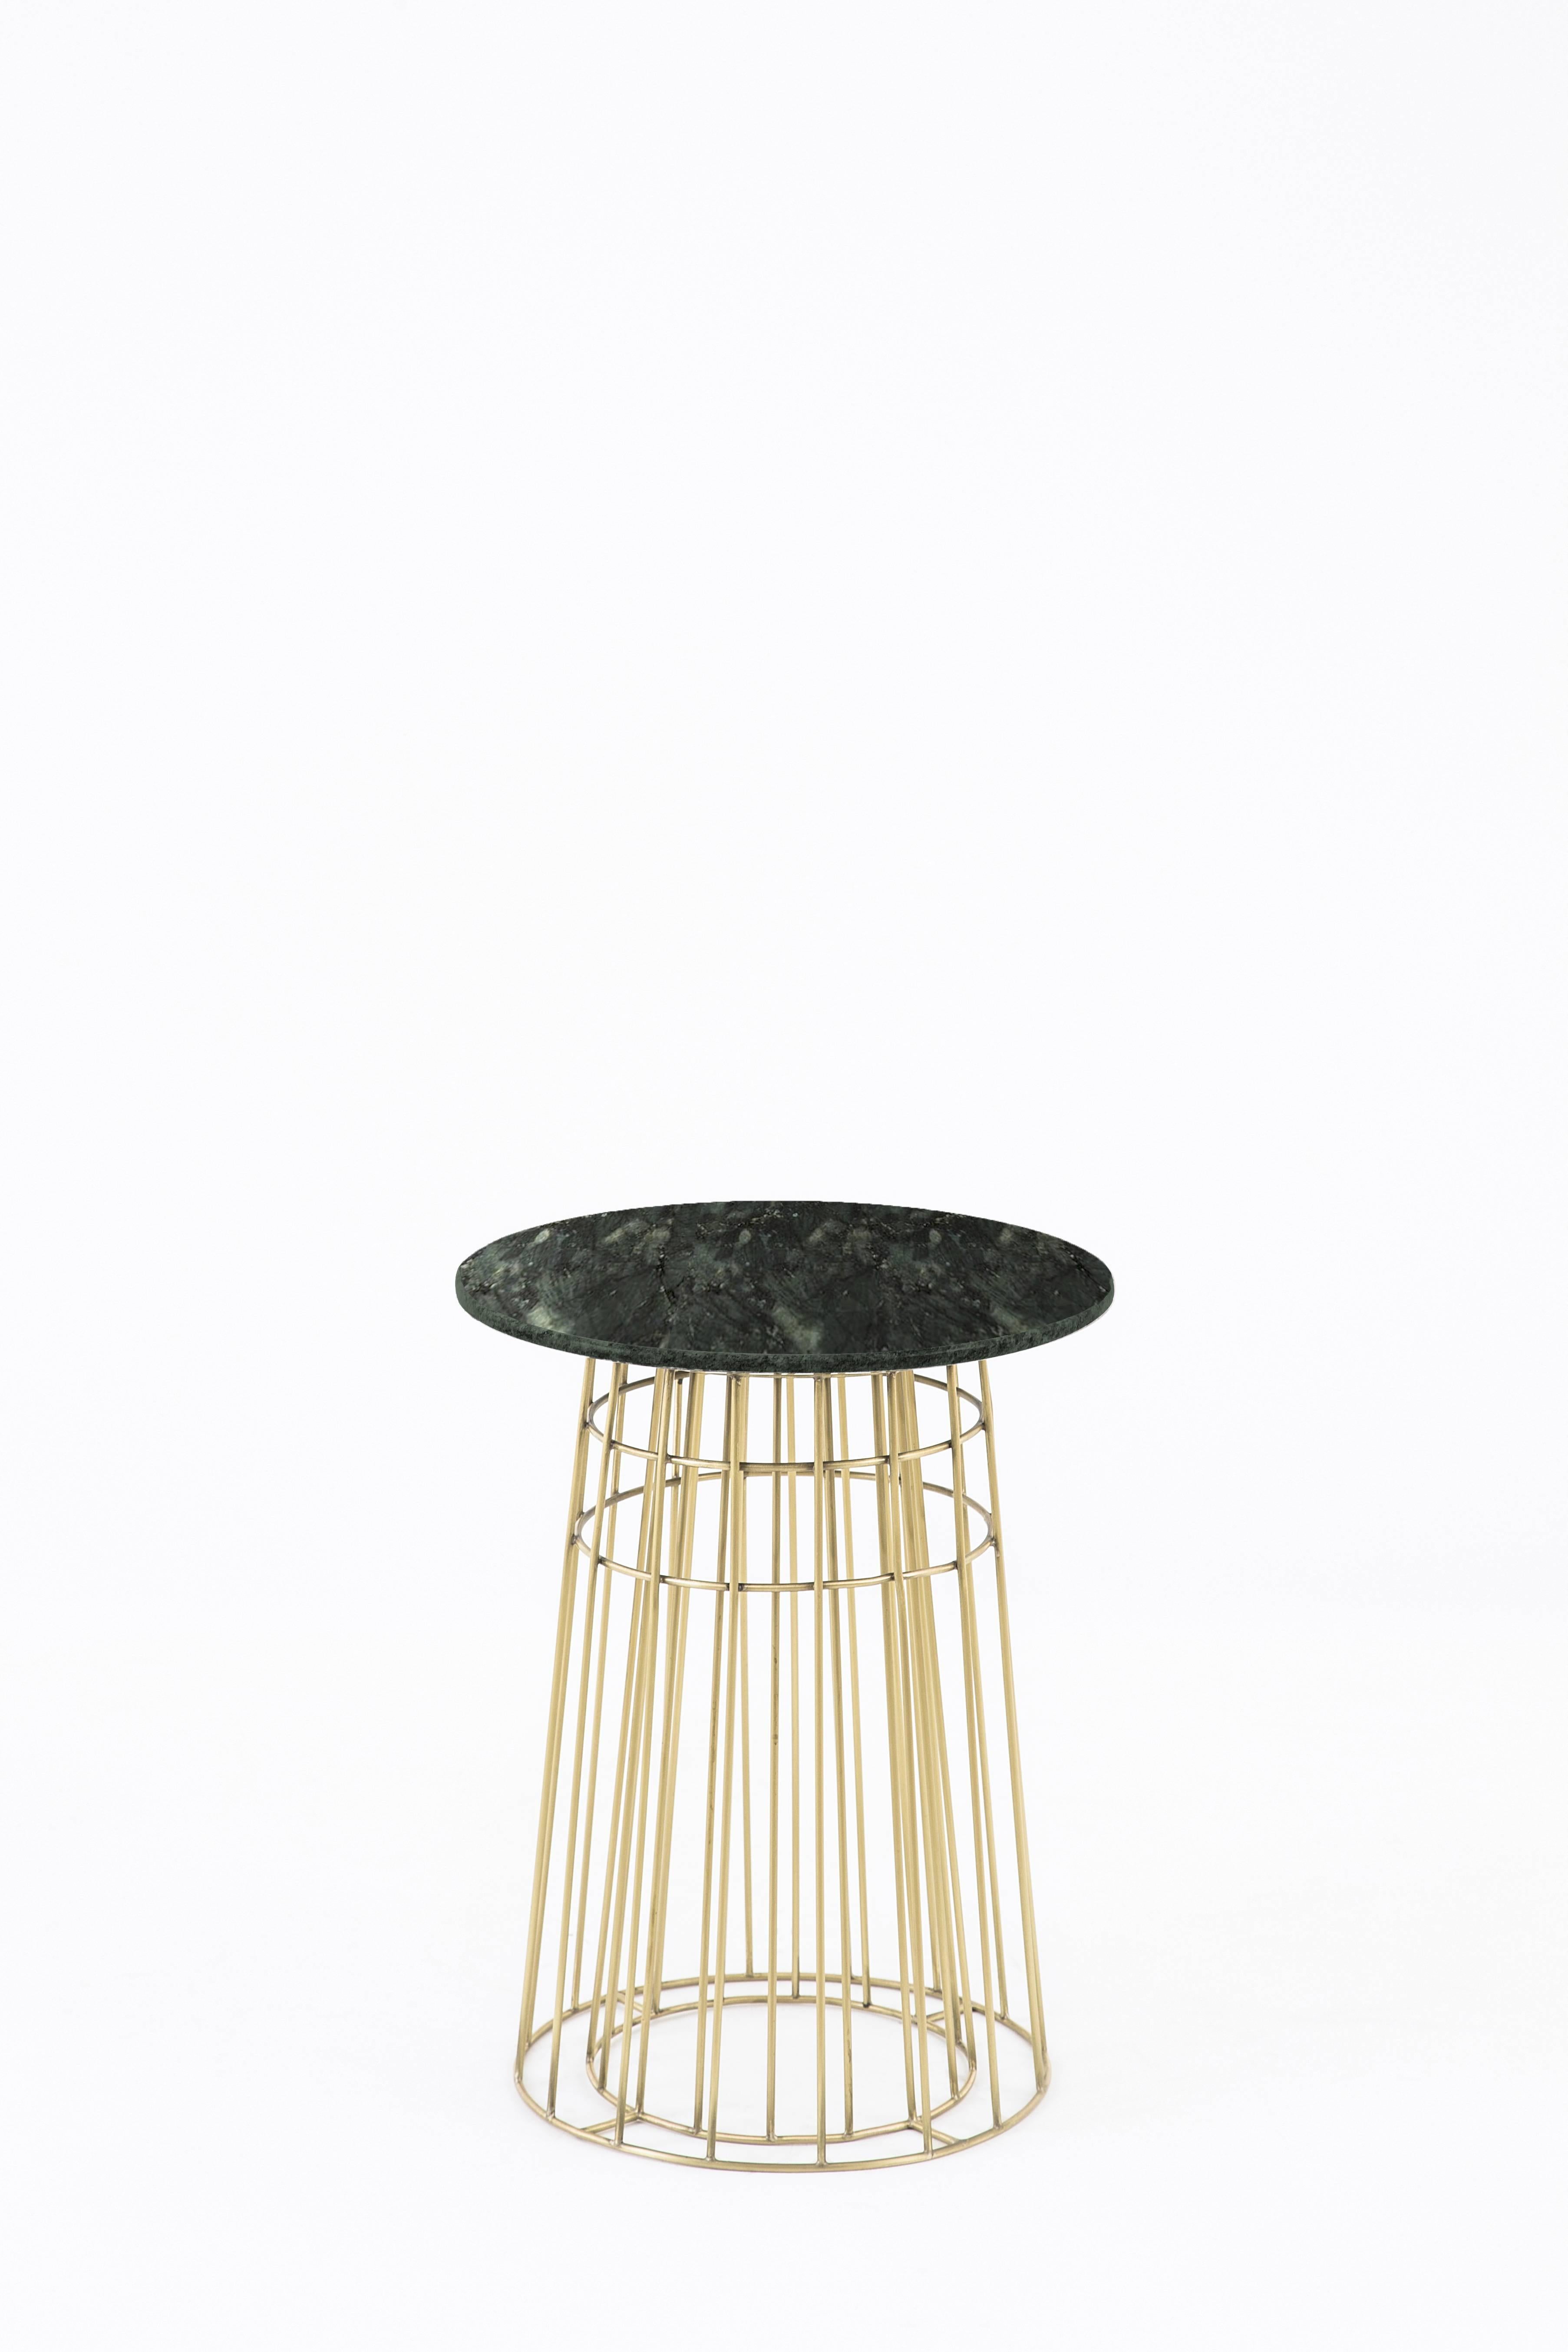 Brushed Contemporary Side Table or Tray Table in Brass and Cafe Baia Granite For Sale